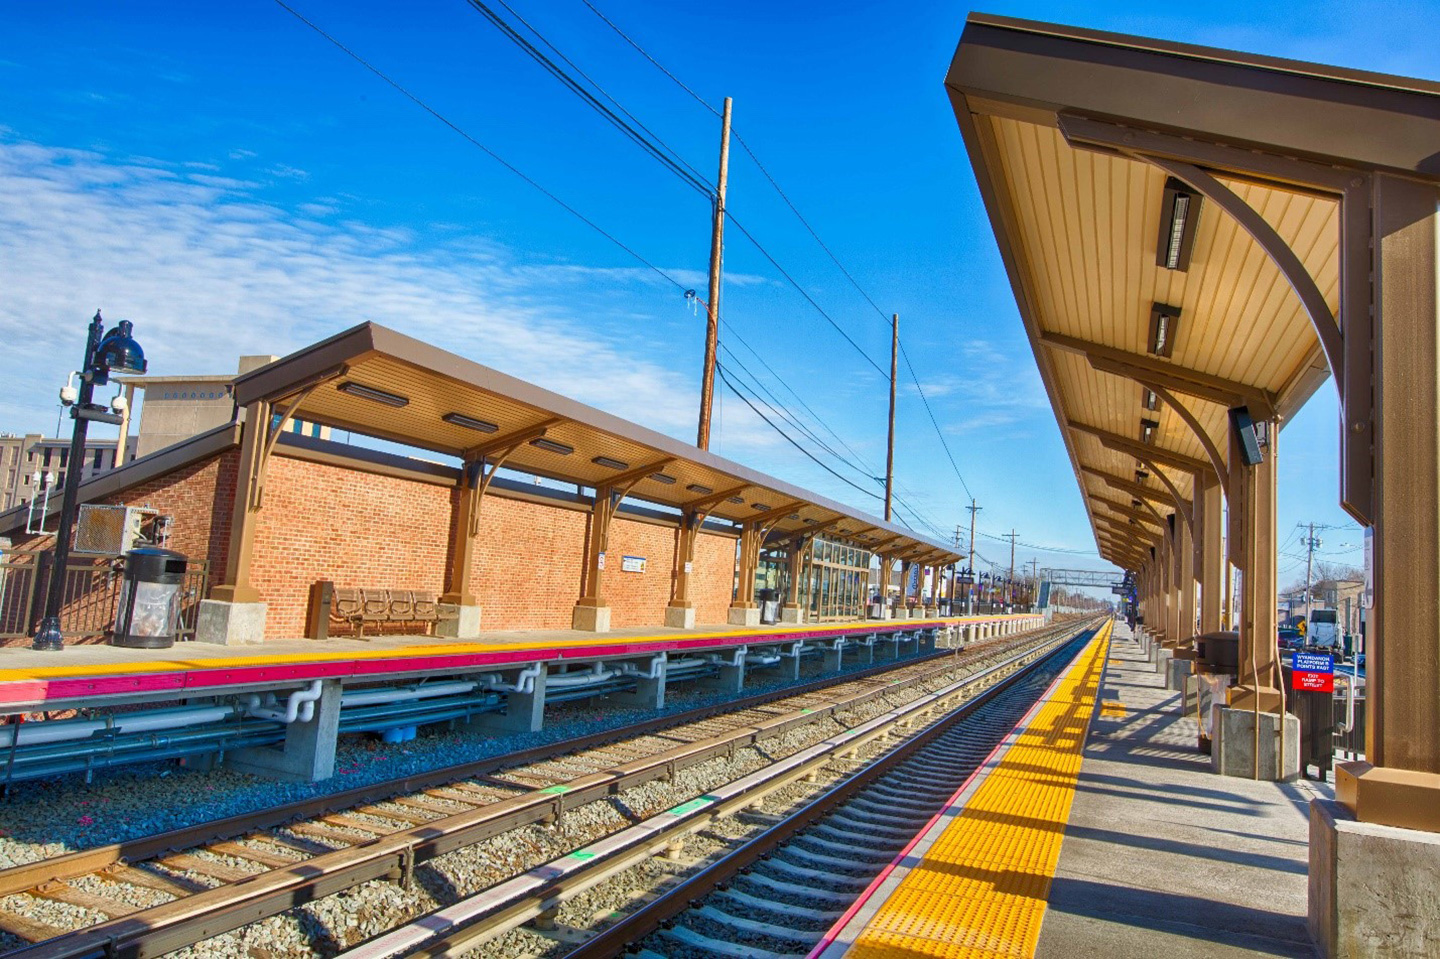 The design-build team of Dewberry and L.K. Comstock & Company, Inc. completed the new Wyandanch Station and track improvements for the Long Island Rail Road, working in phases to avoid train delays.  